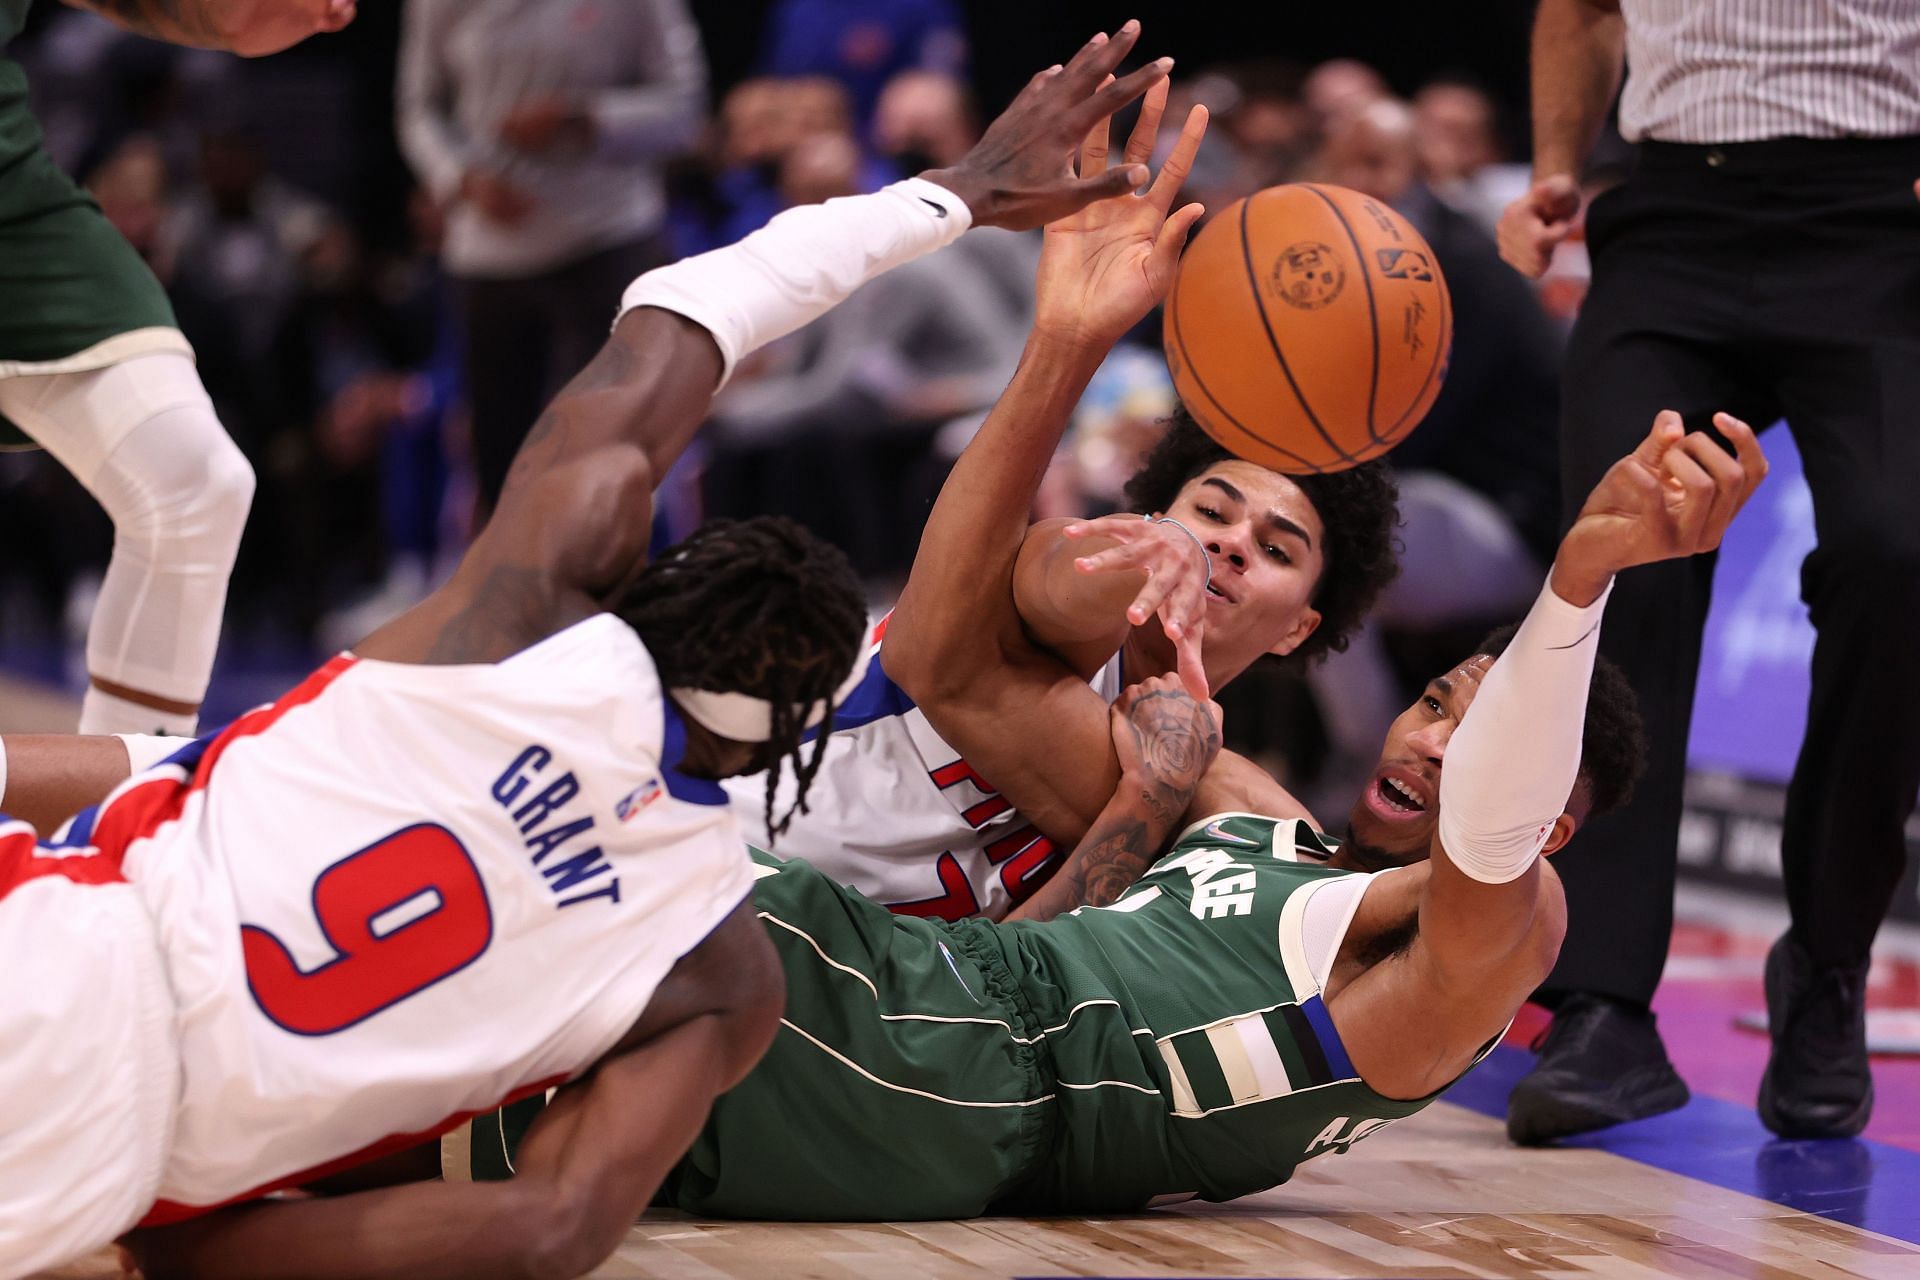 Detroit Pistons players fight to recover the ball in a game against the Milwaukee Bucks